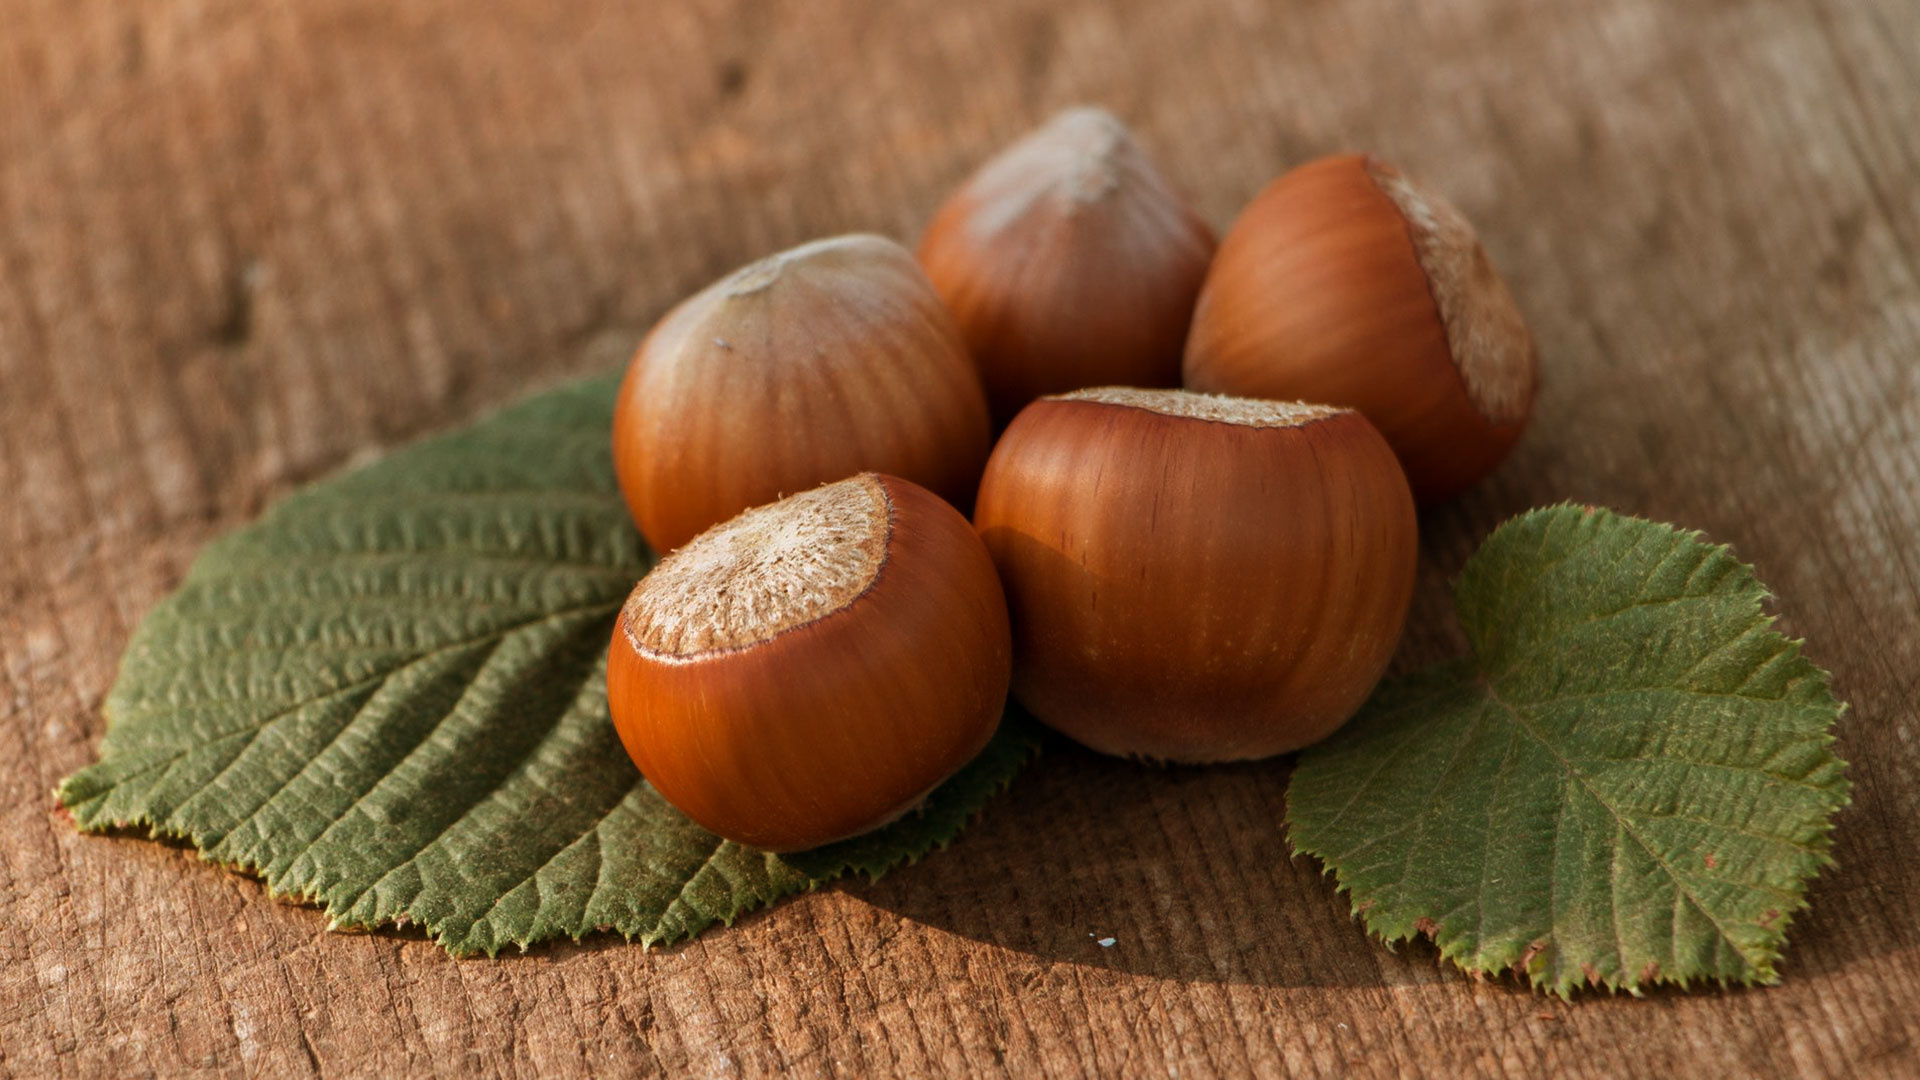 Hazelnuts: Have the highest Folate content than any other nut. 1920x1080 Full HD Wallpaper.